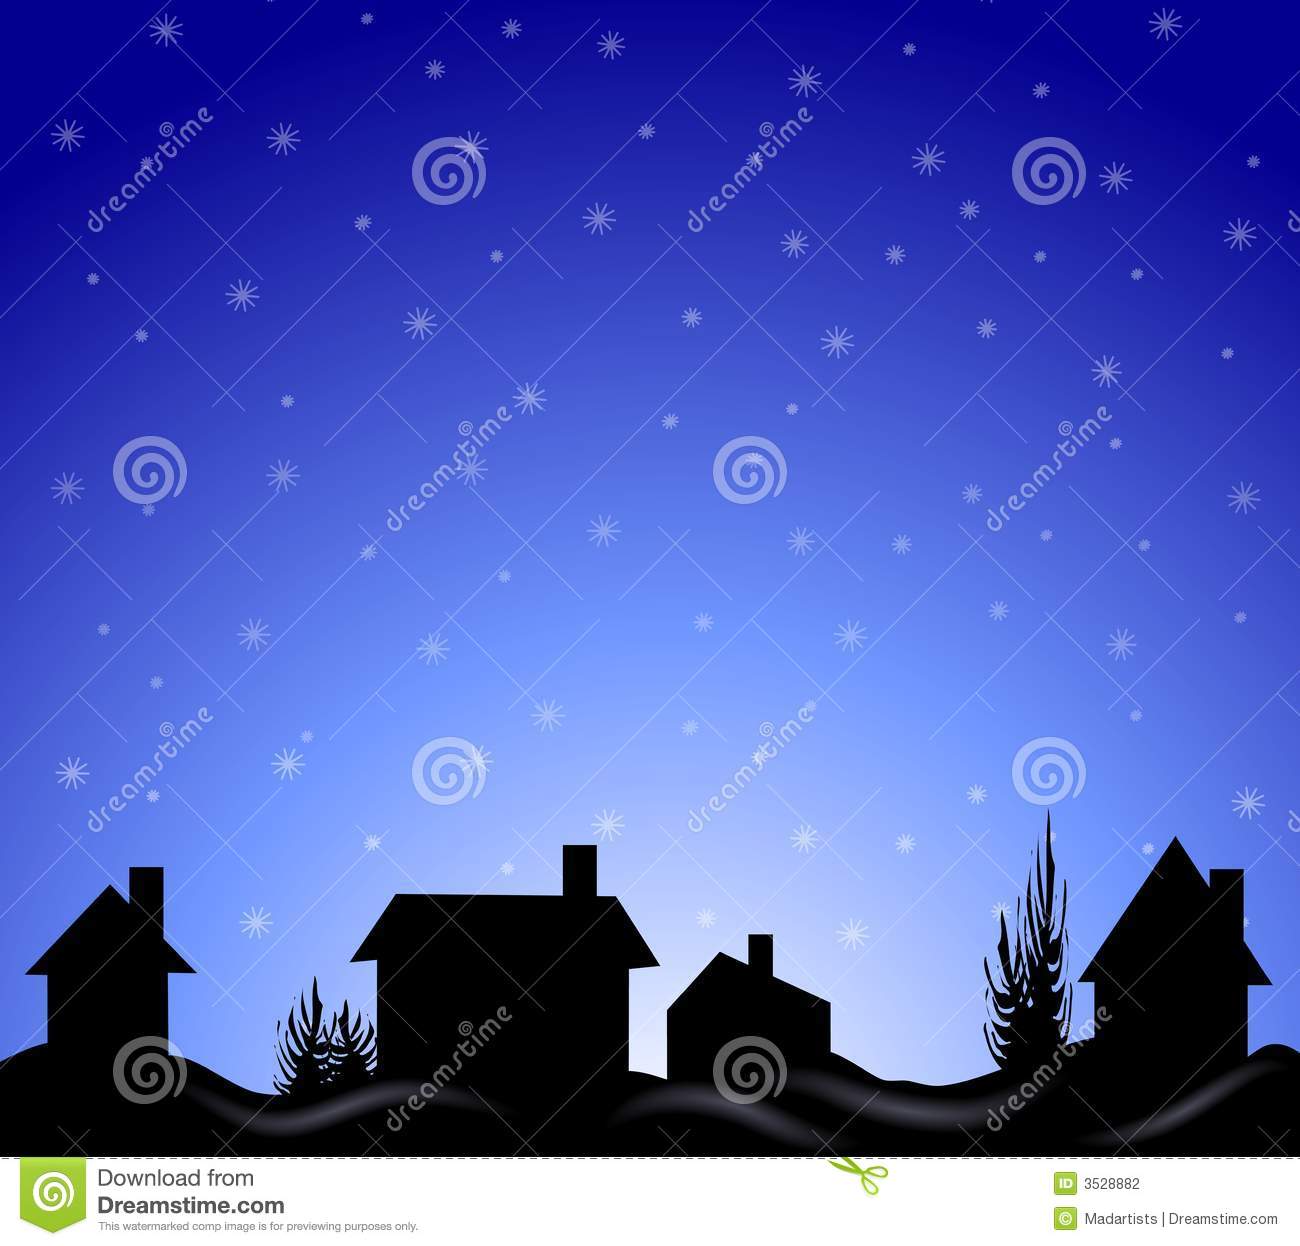 Clip Art Illustration Of A Winter Night Scene With Houses And Trees